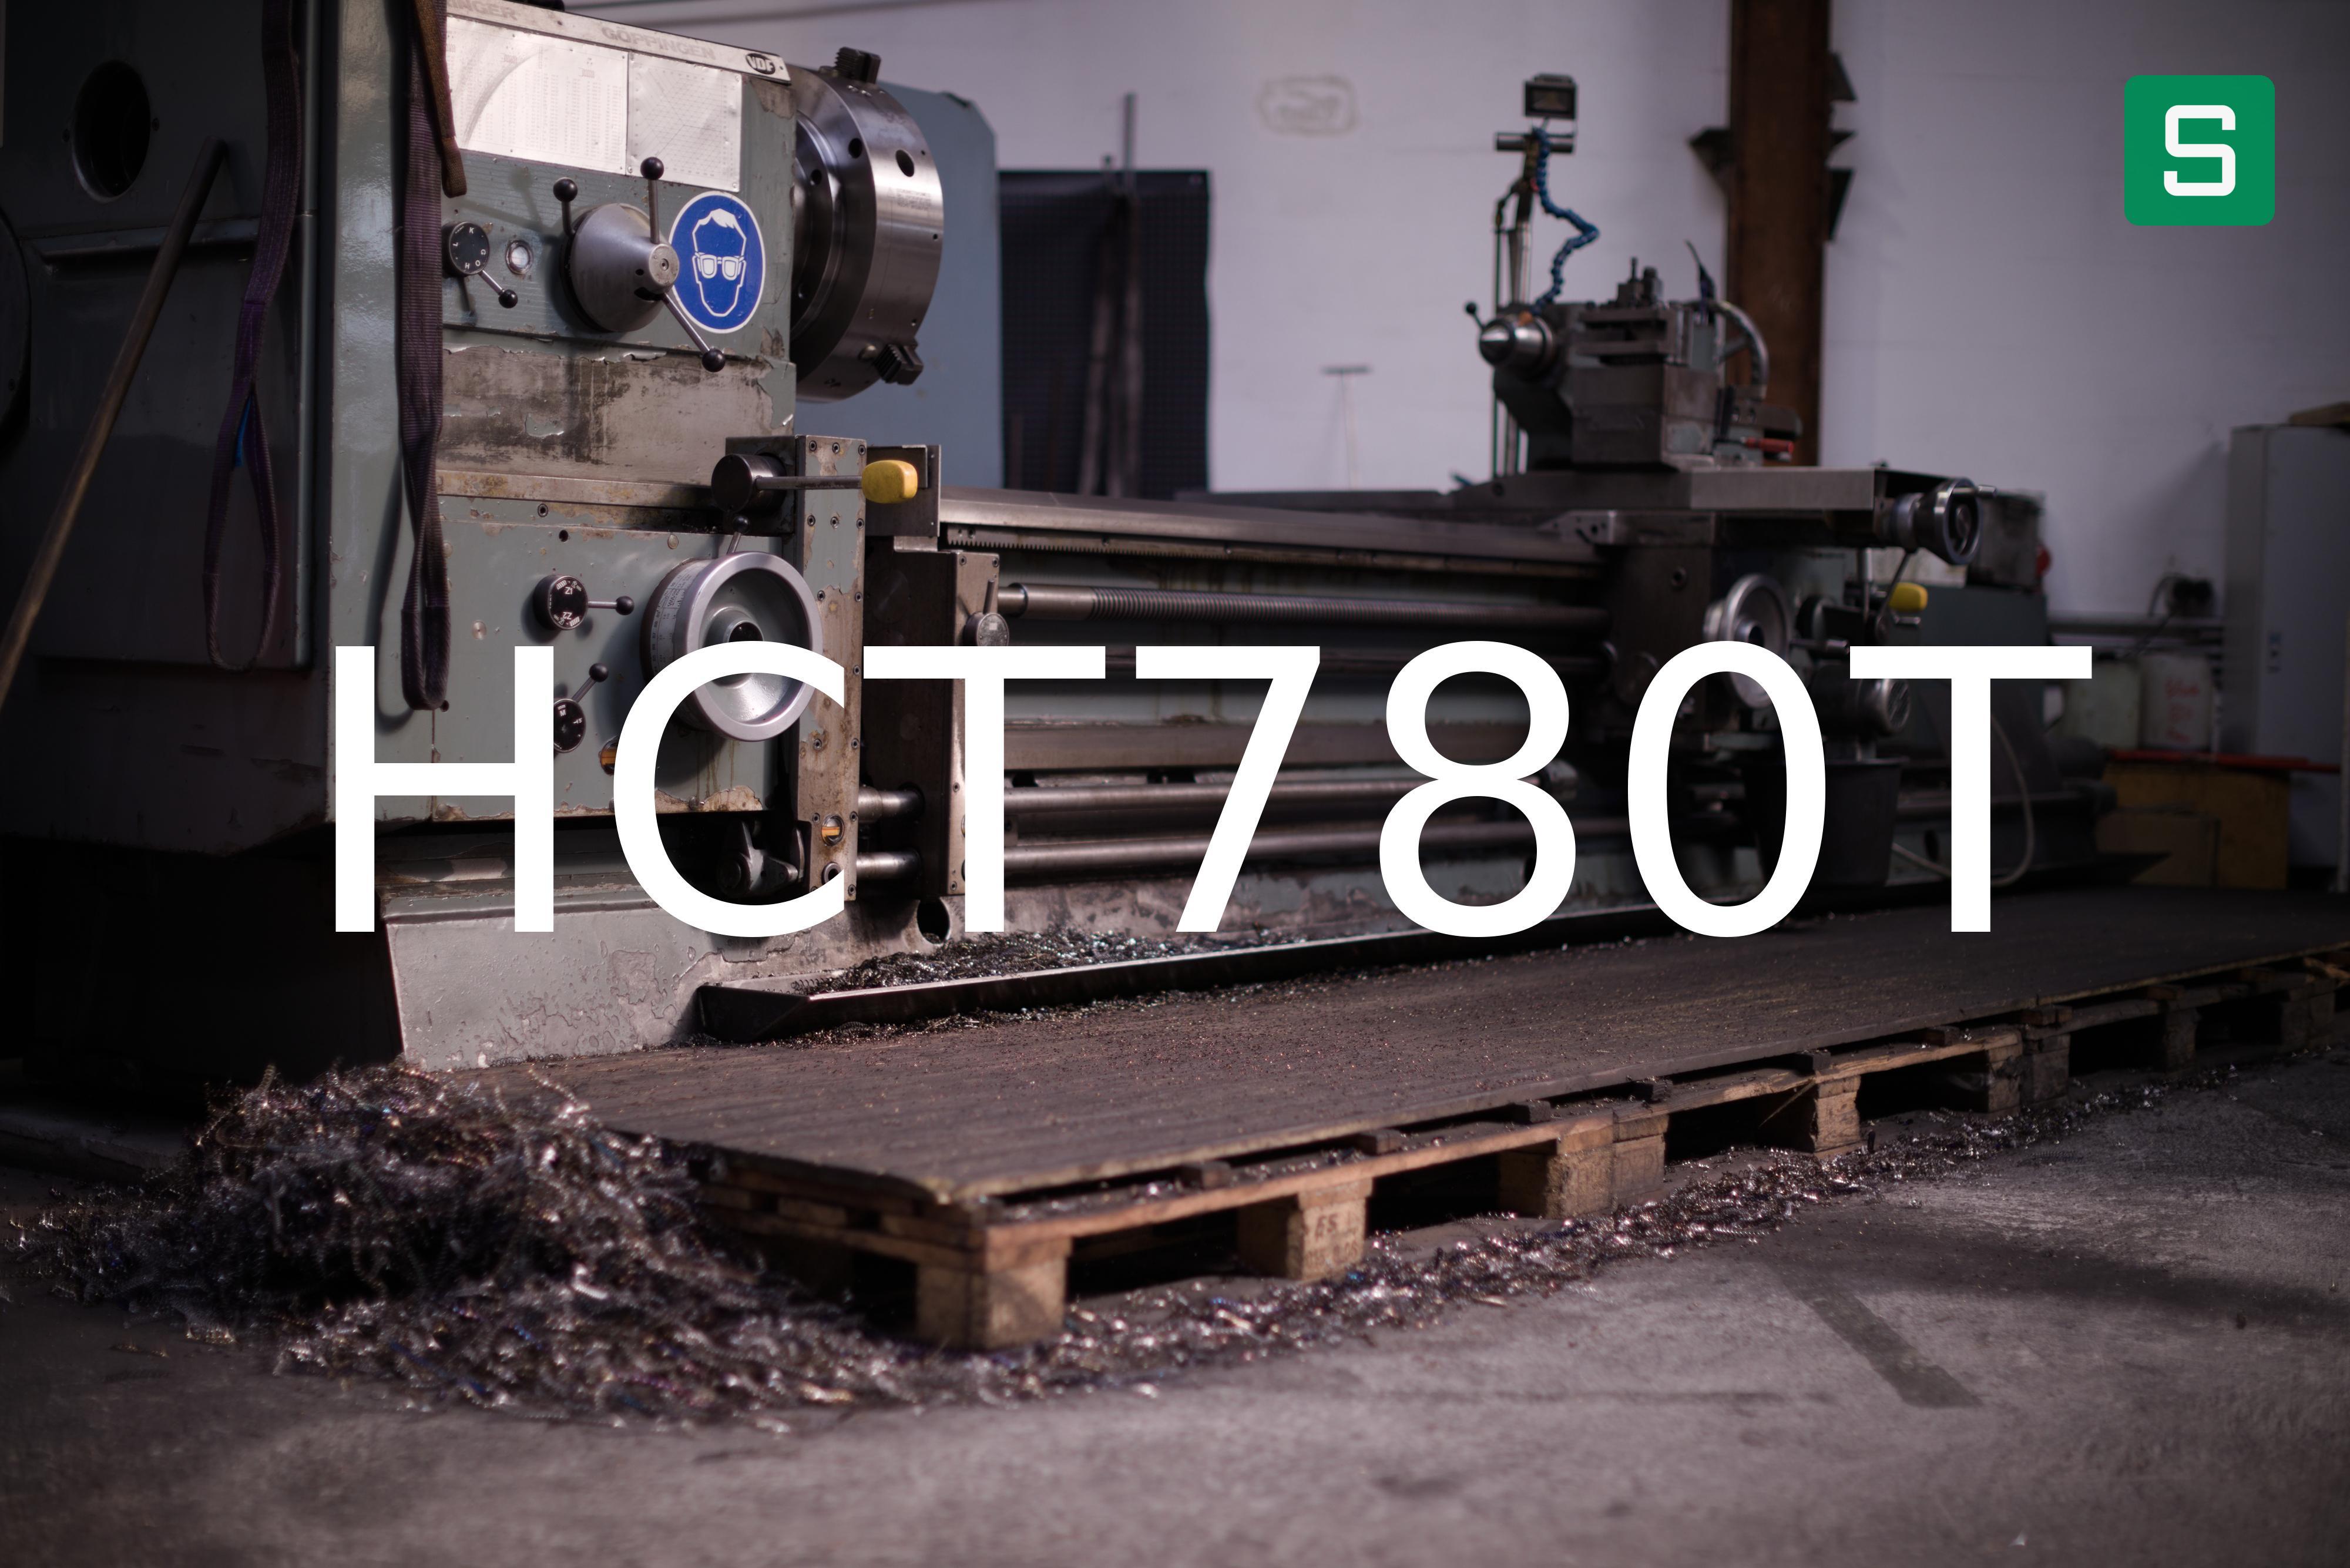 Steel Material: HCT780T